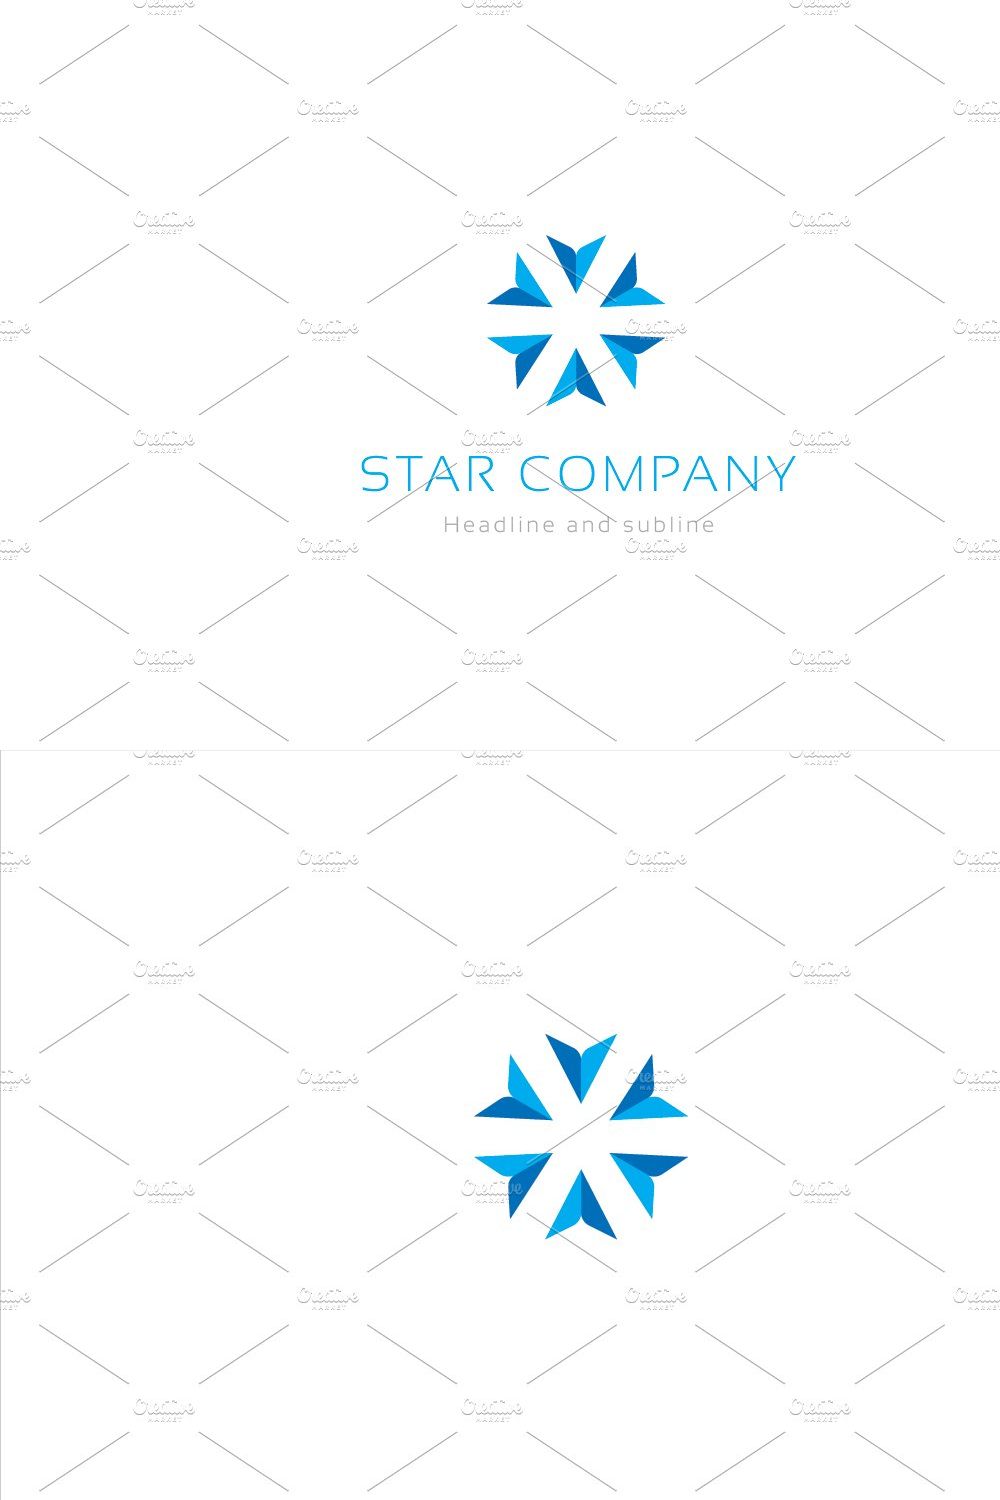 Star company logo. pinterest preview image.